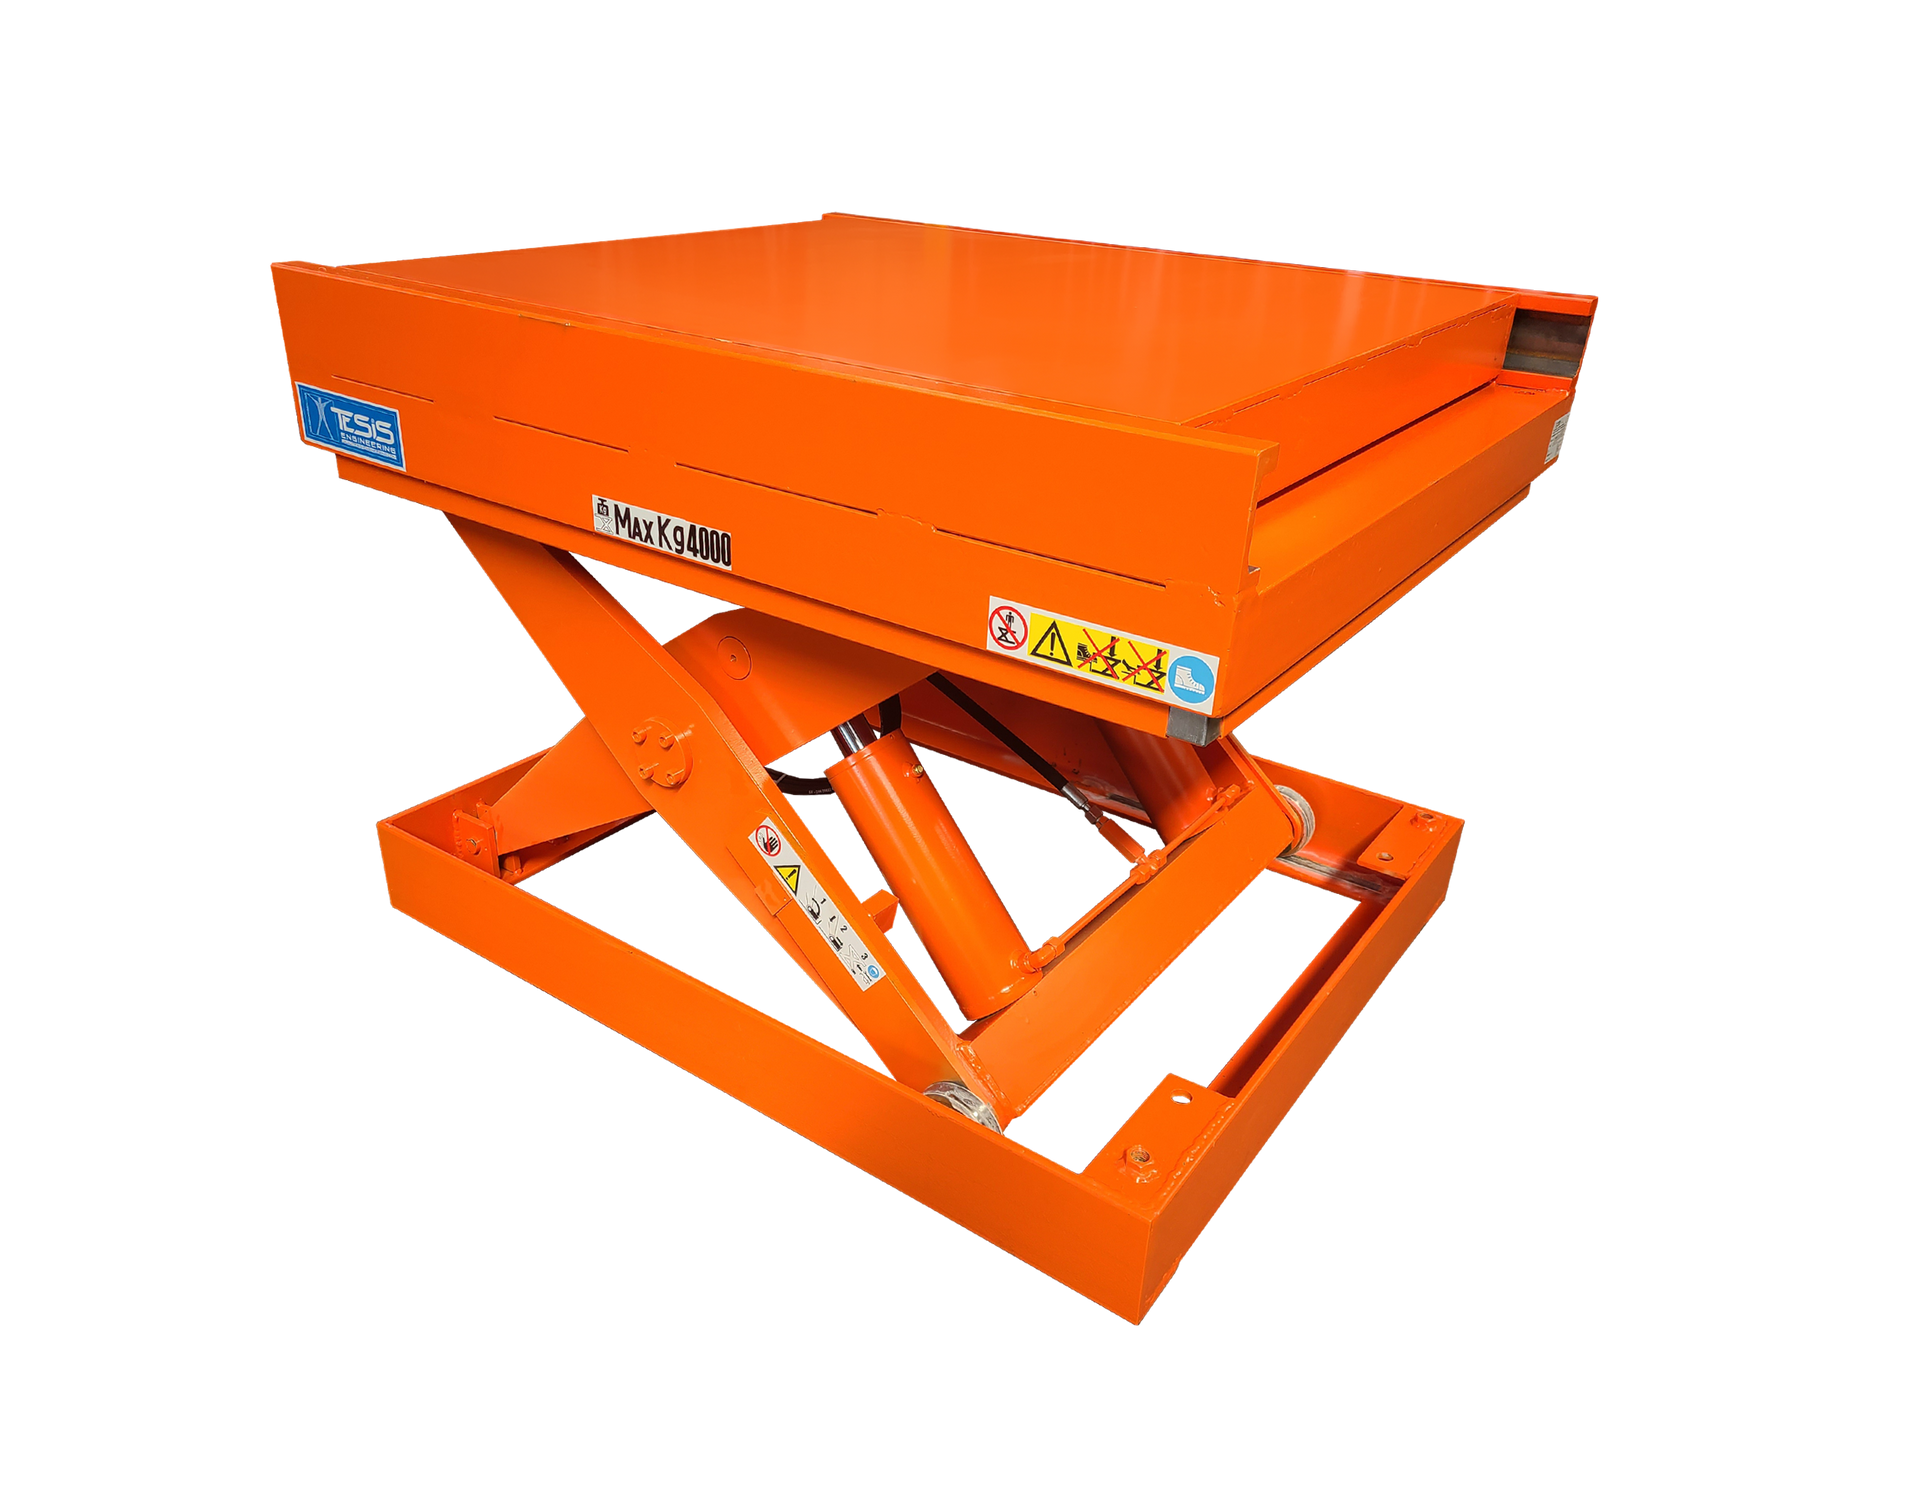 Platform lift with sliding table, lifting table with shifting top, scissor lift with moving platform top